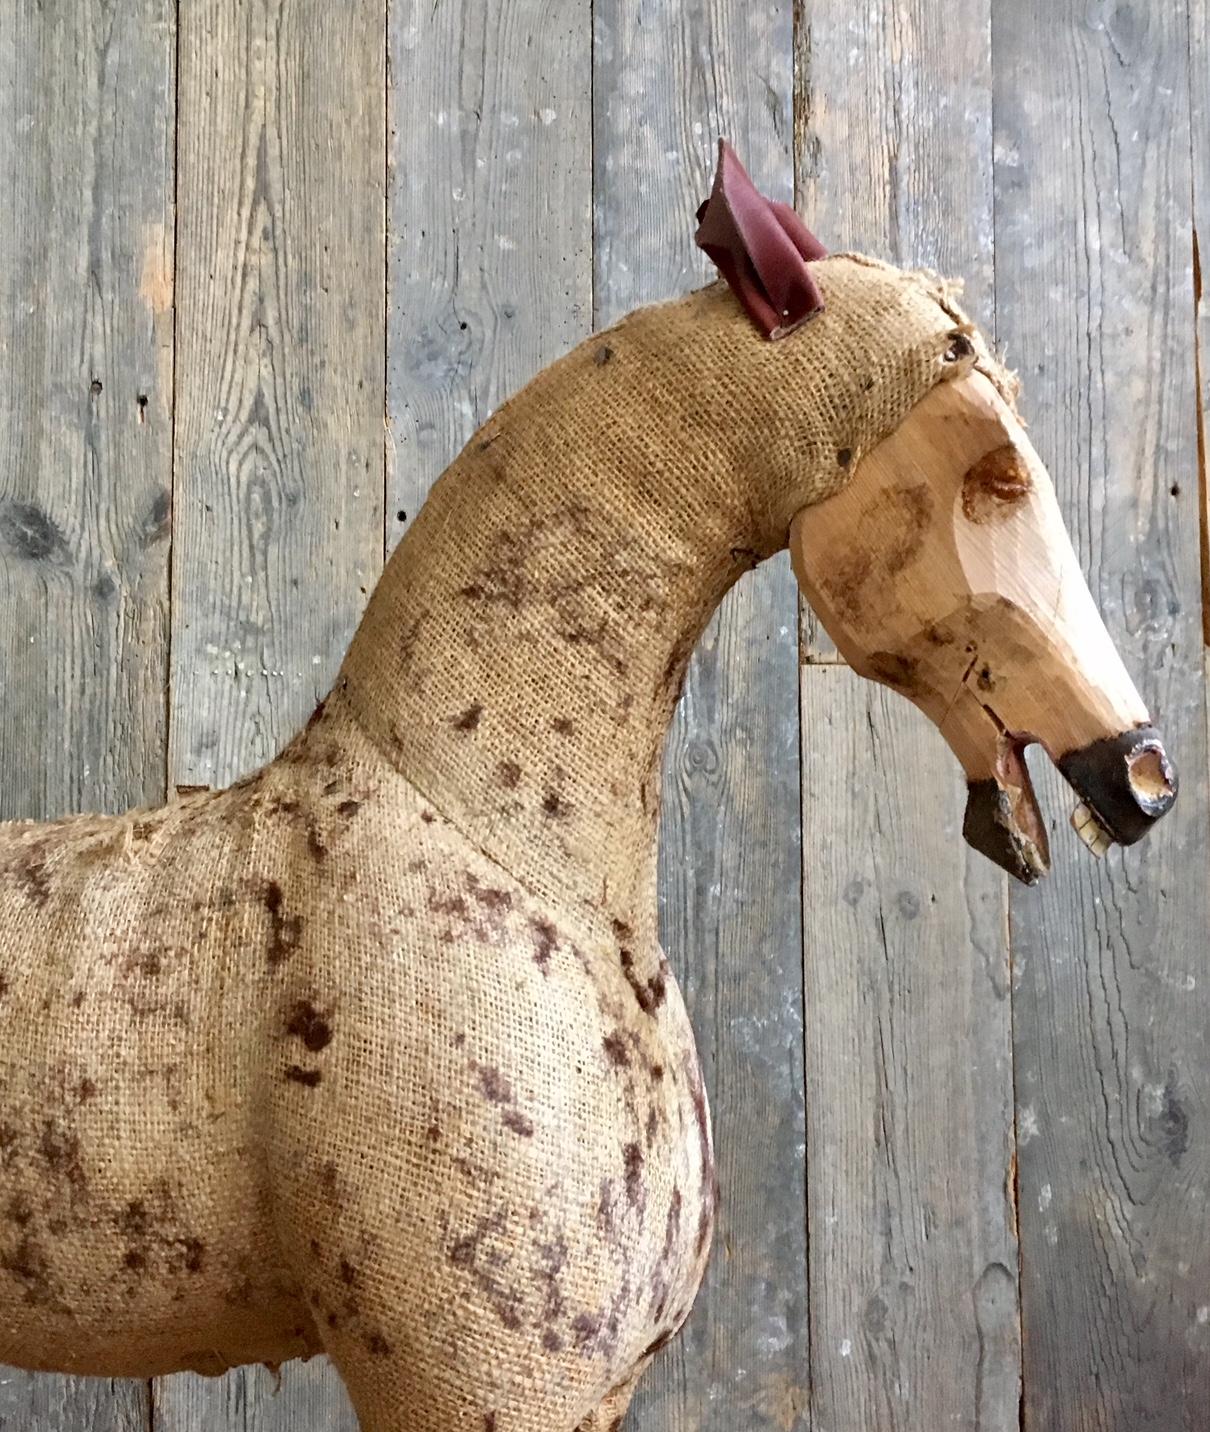 Decorative Vintage Horse in Worn Burlap, Leather and Wood 2